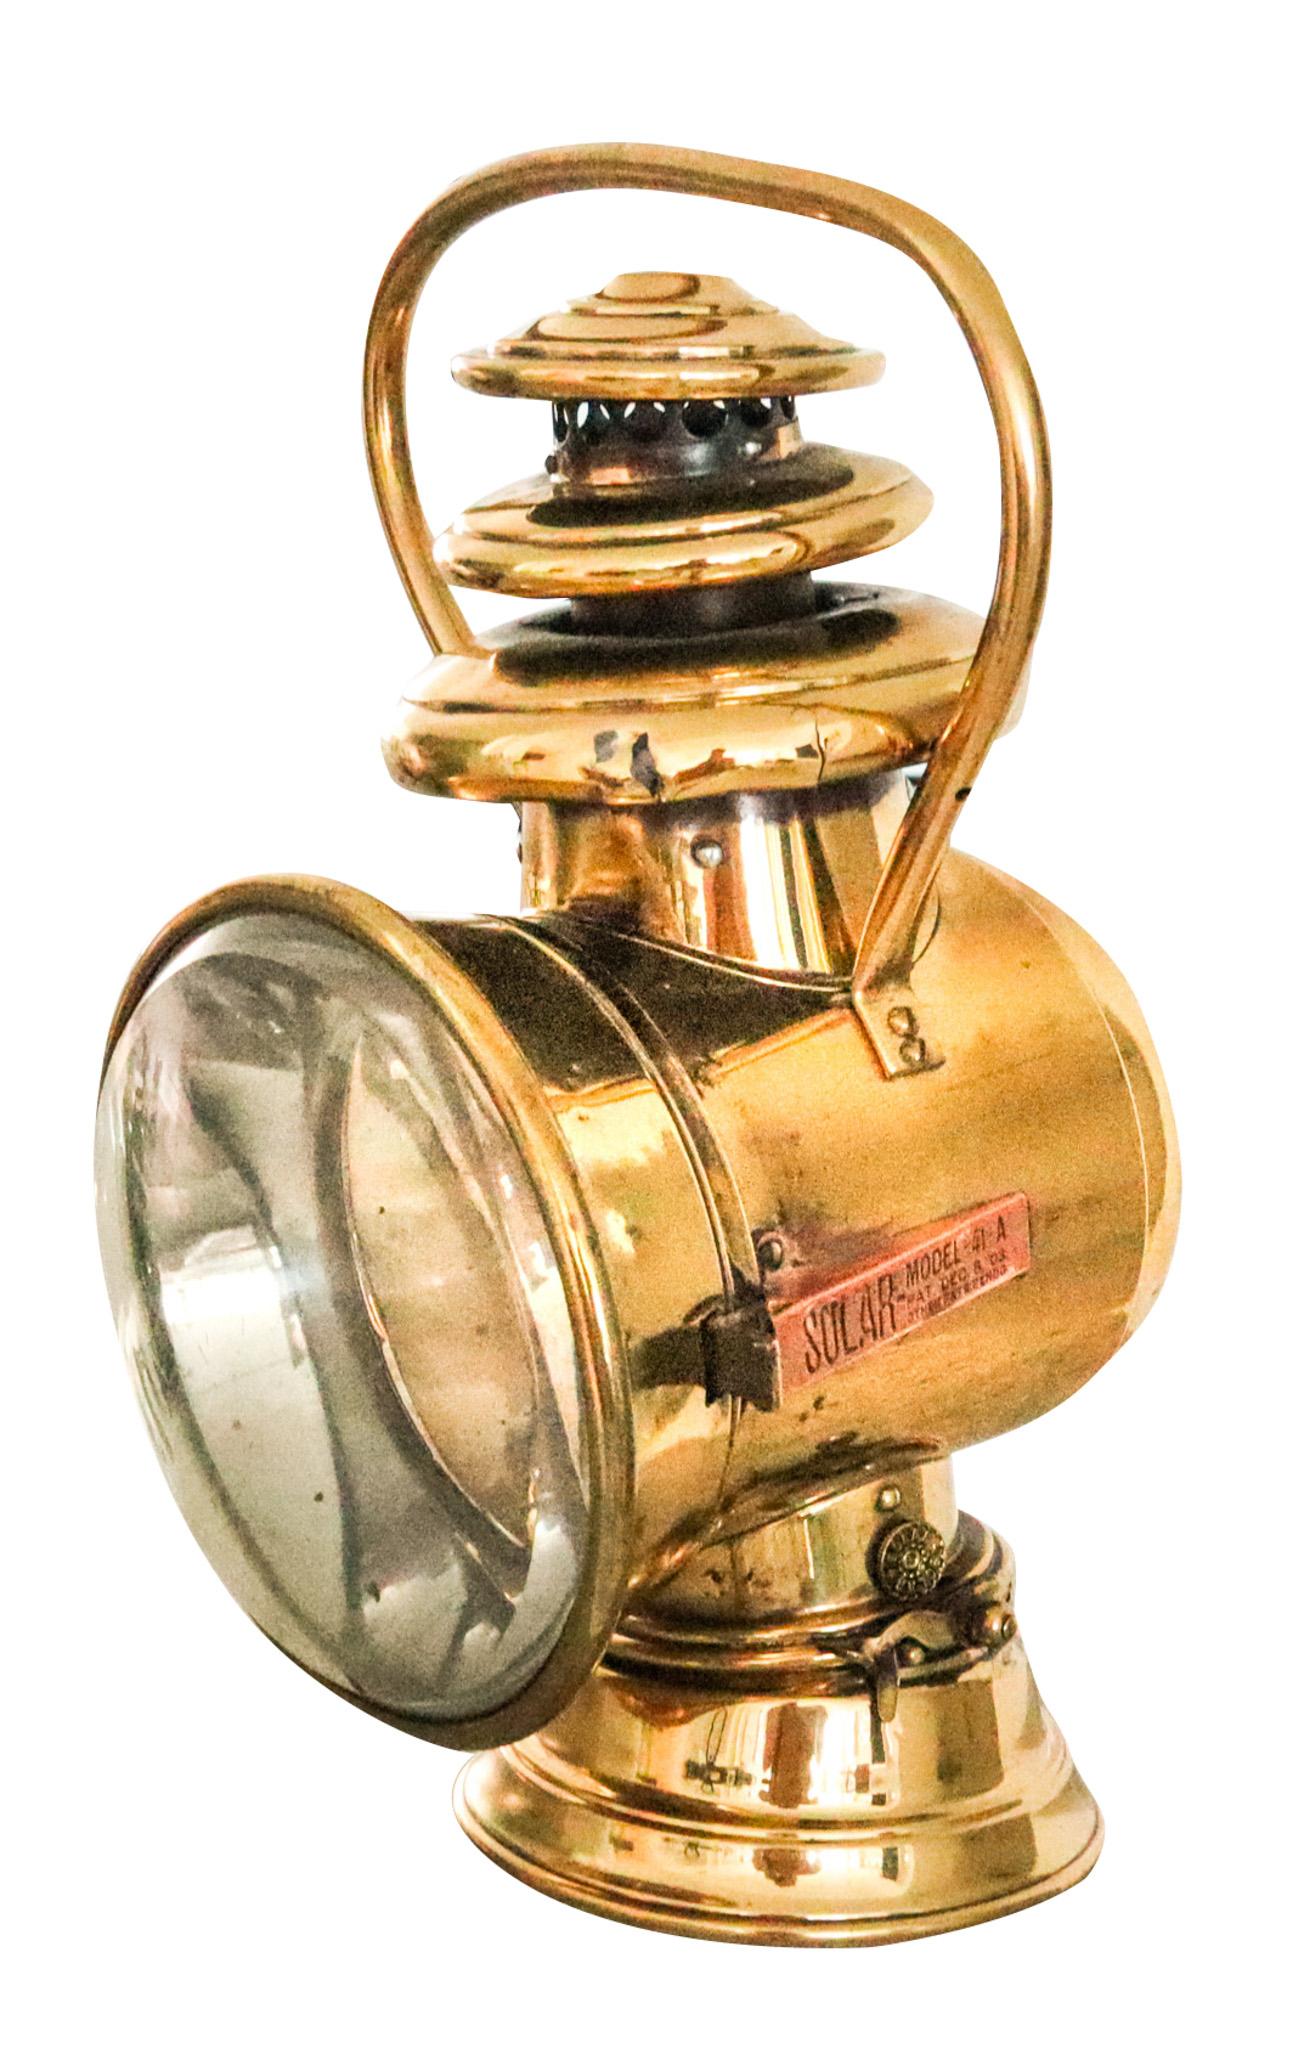 Solar kerosene automobile lamp designed by The Badger Brass Mfg Co.

Very beautiful and very decorative piece, created in America by The Badger Brass Mfg Co., back in the 1903. This is one of the earliest kerosene lamps designed to be attached to